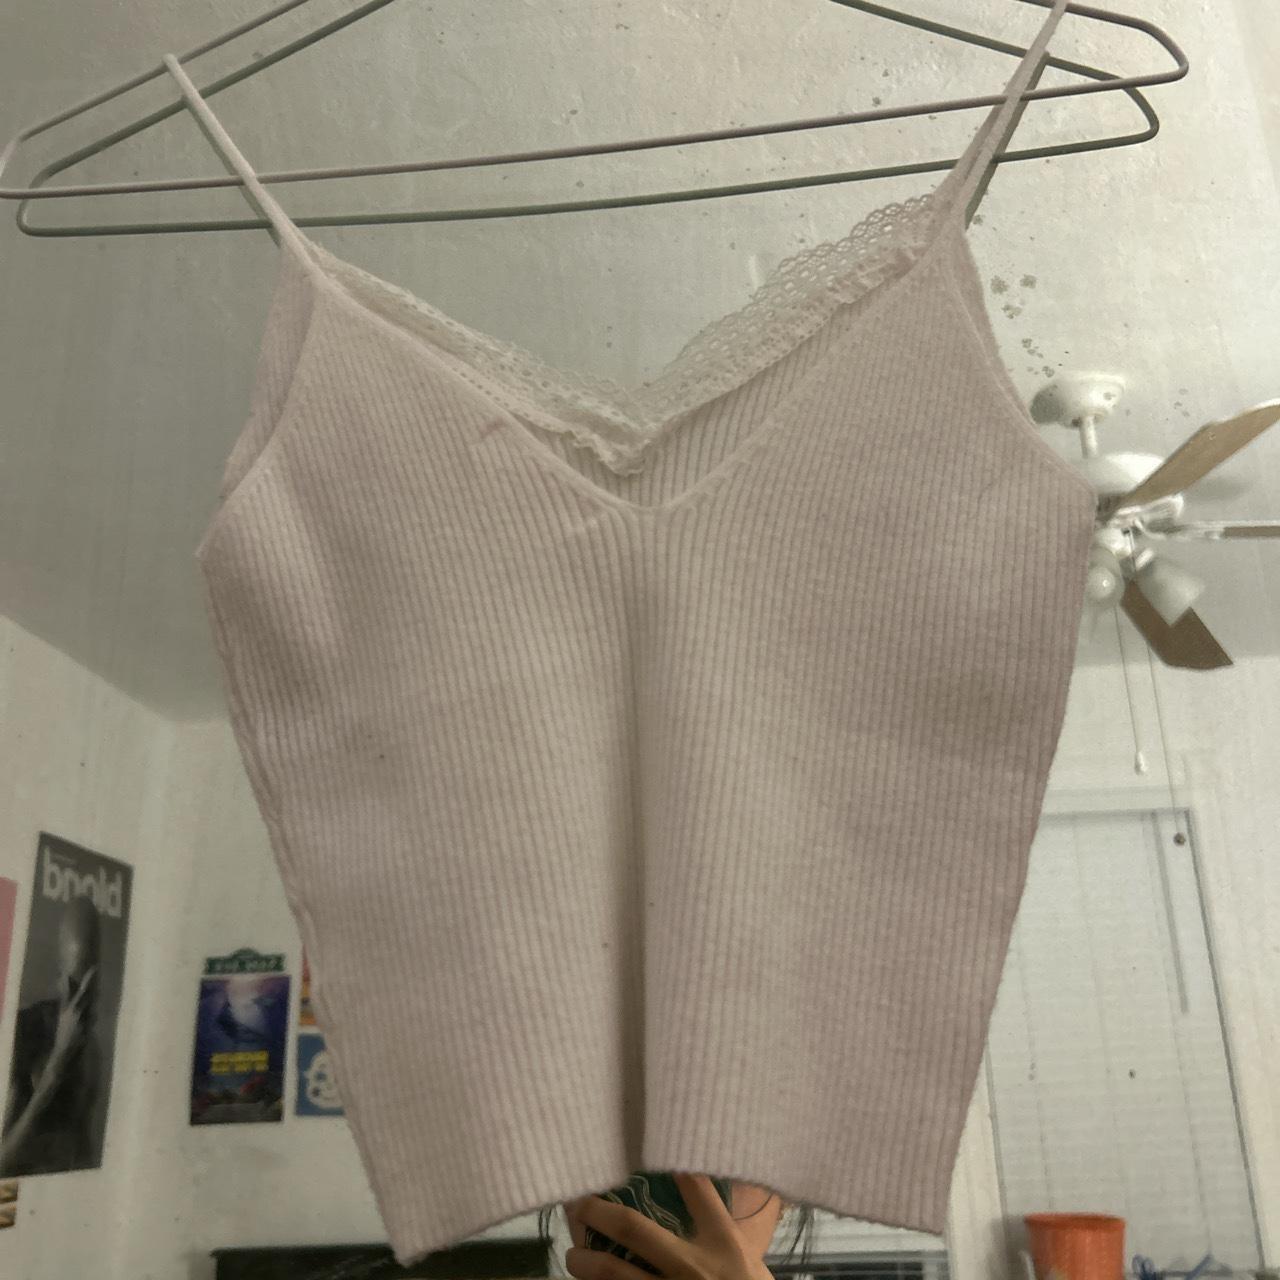 Lottie Miss white lace cami tank top ! tagged - Depop